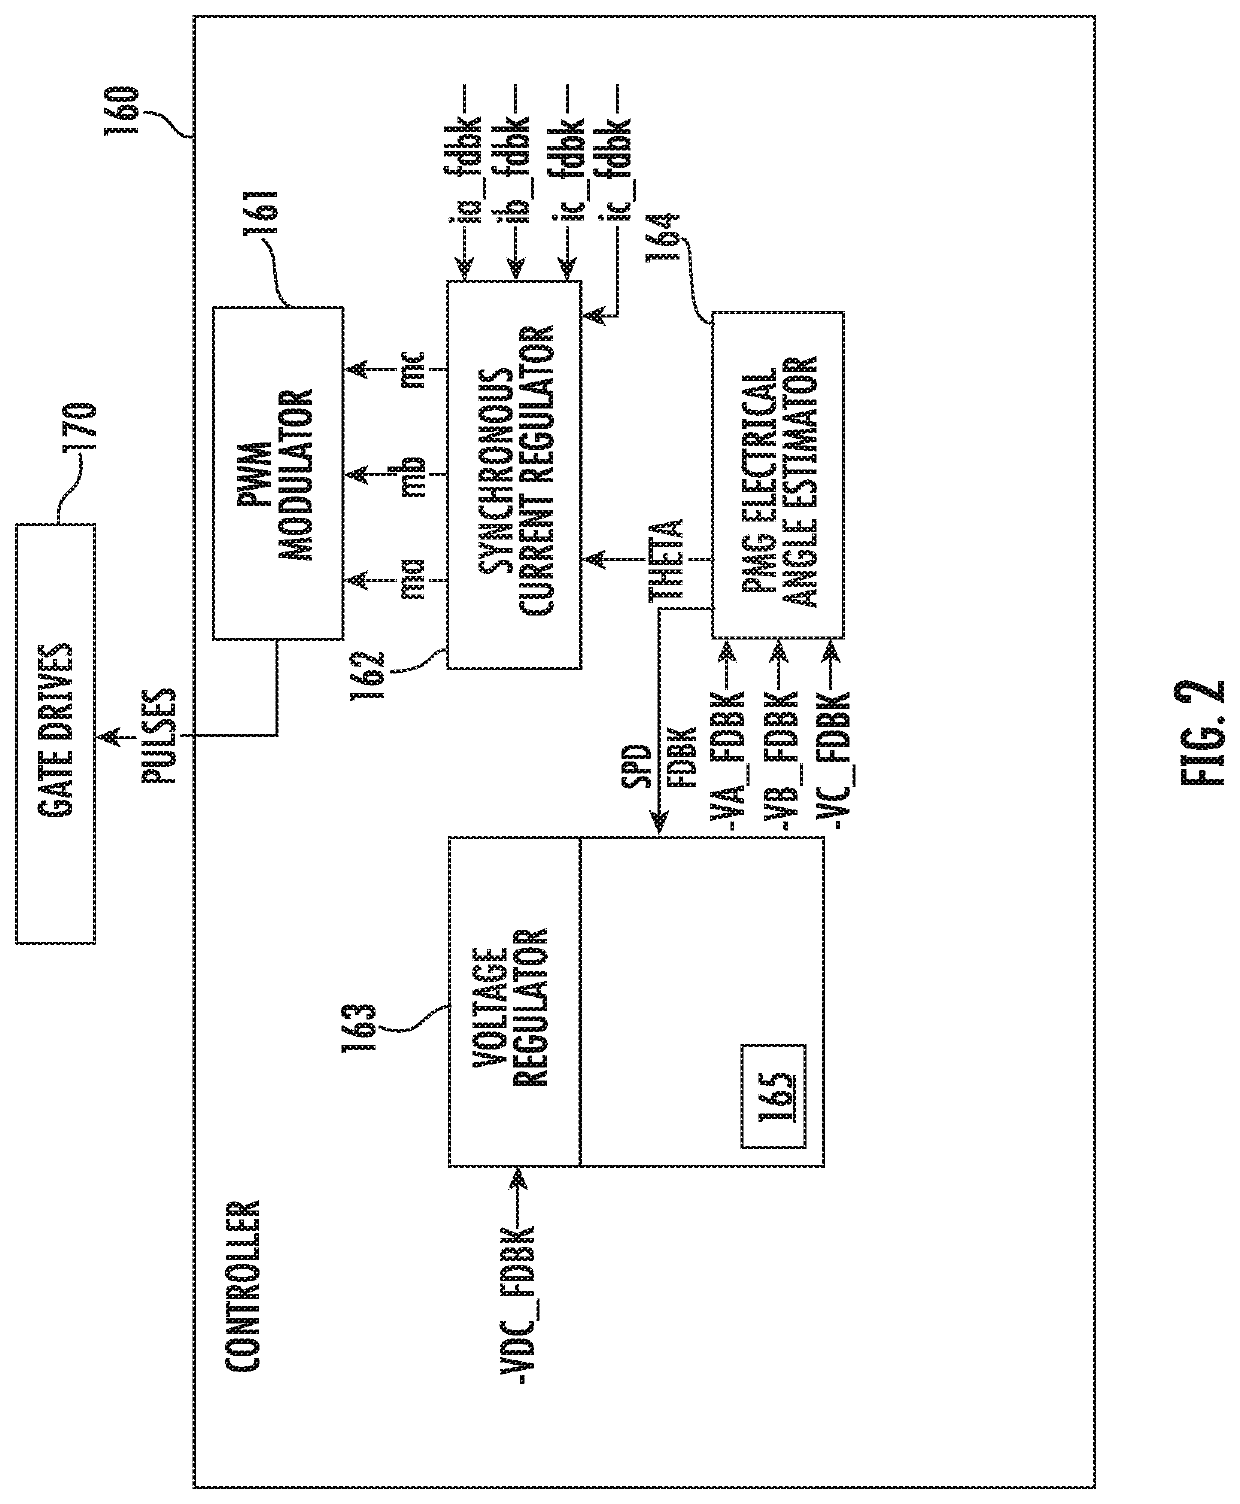 DC power generating system with voltage ripple compensation